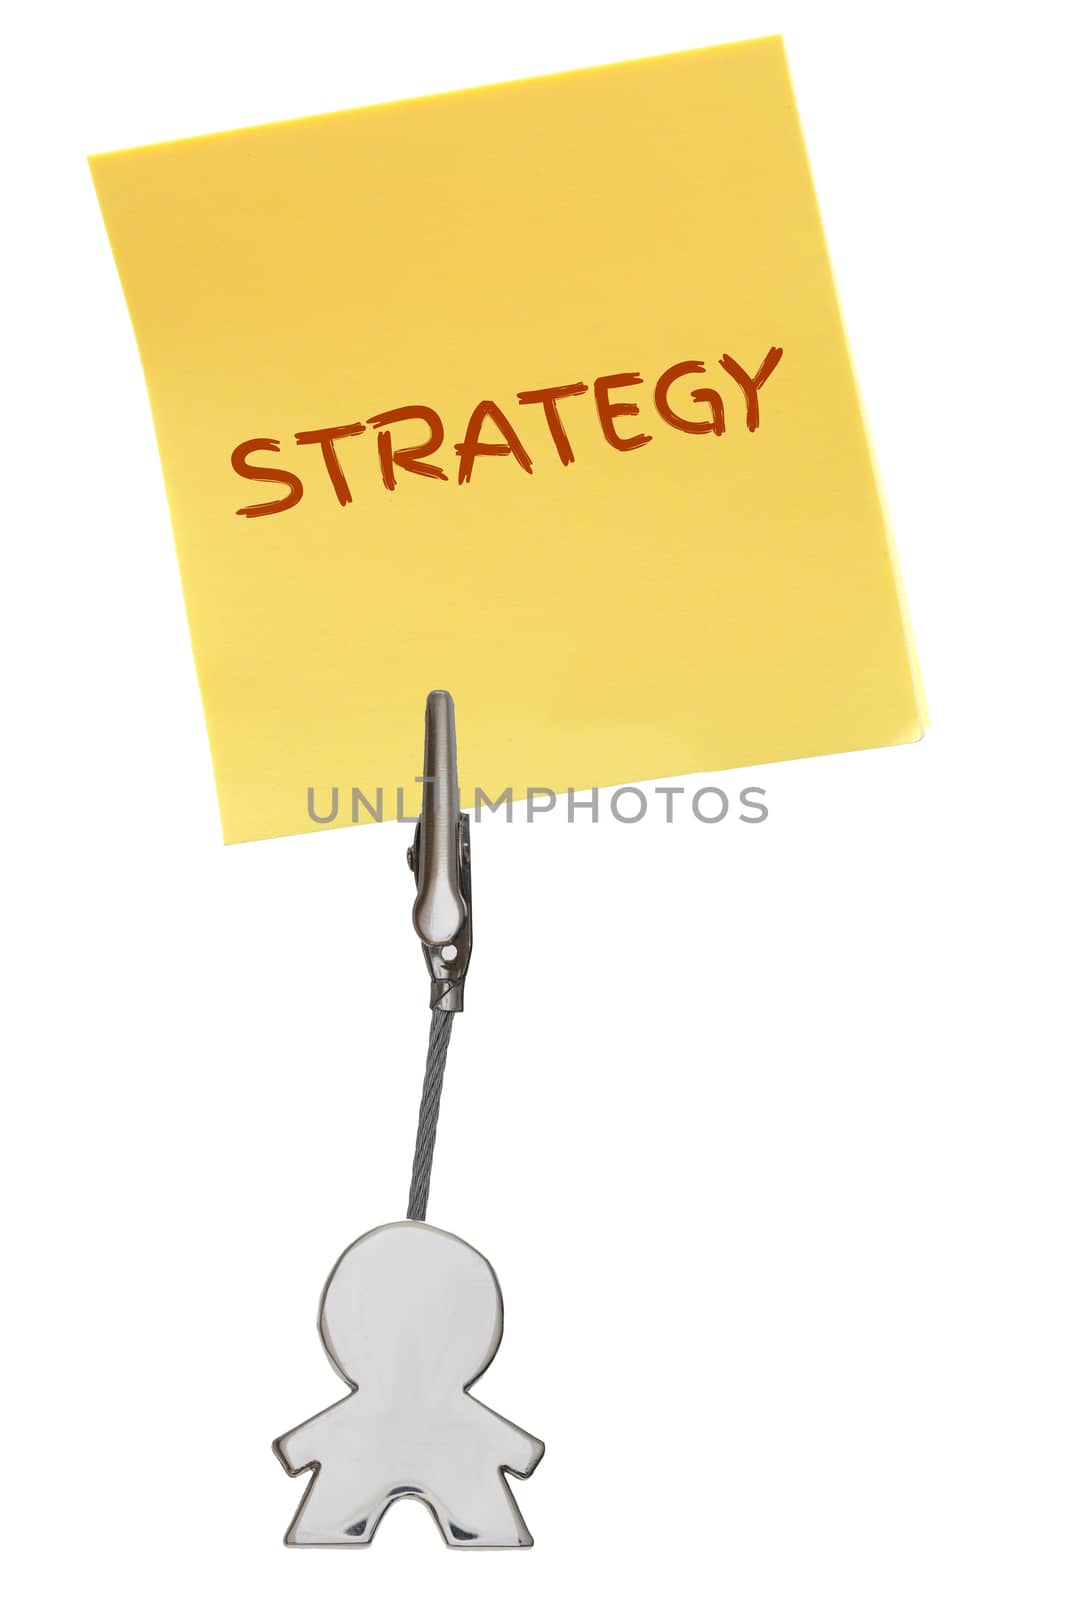 Man Figure Business Card Holder with clip holding a yellow paper note STRATEGY; isolated on white background, customizable